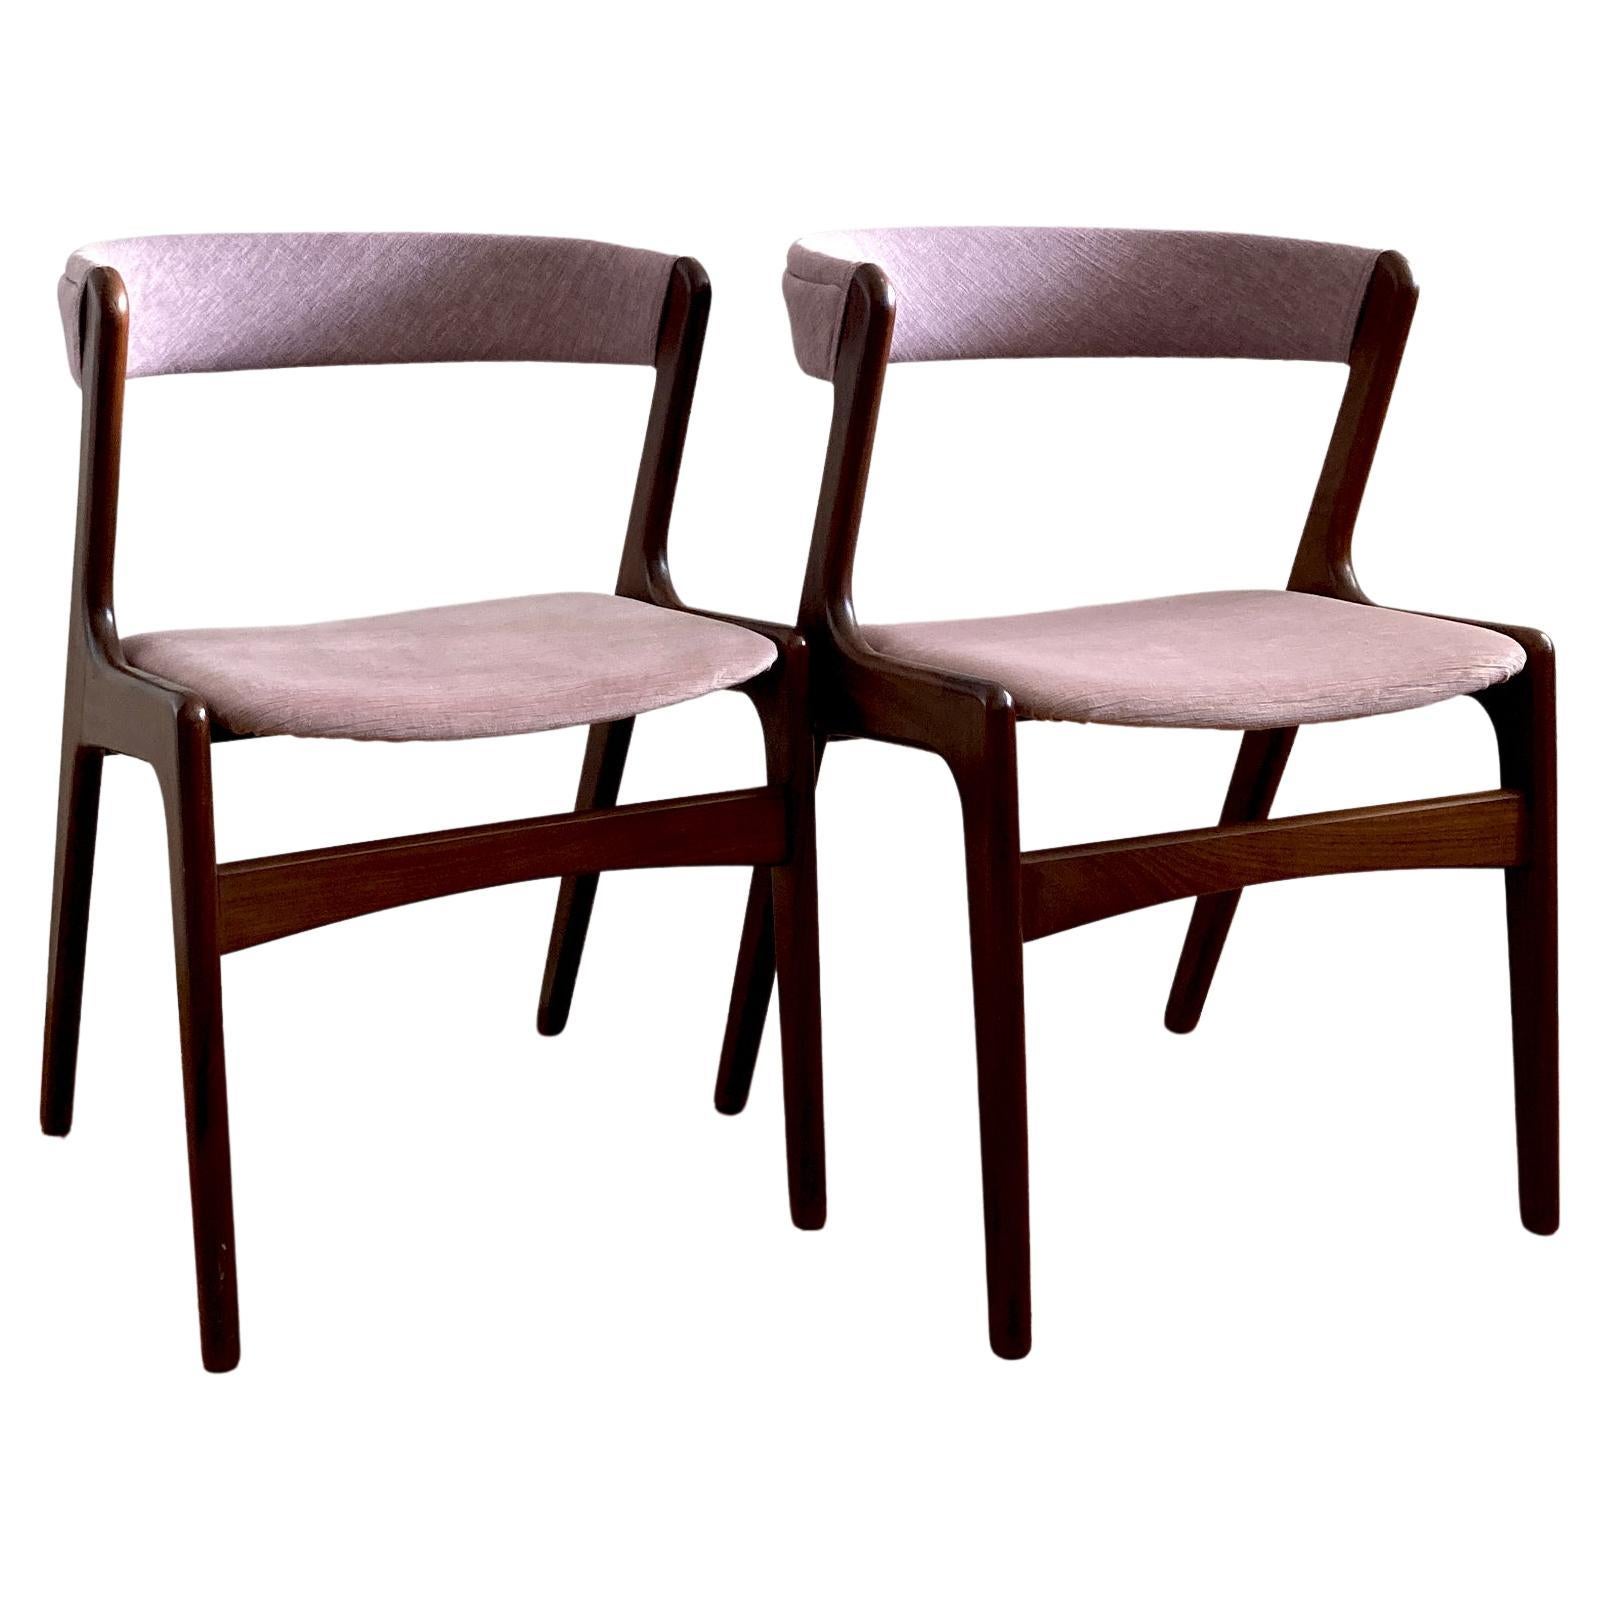 Kai Kristiansen Mauve Pink Curved Back Dining Side Chairs, 1960s, Pair of Two For Sale